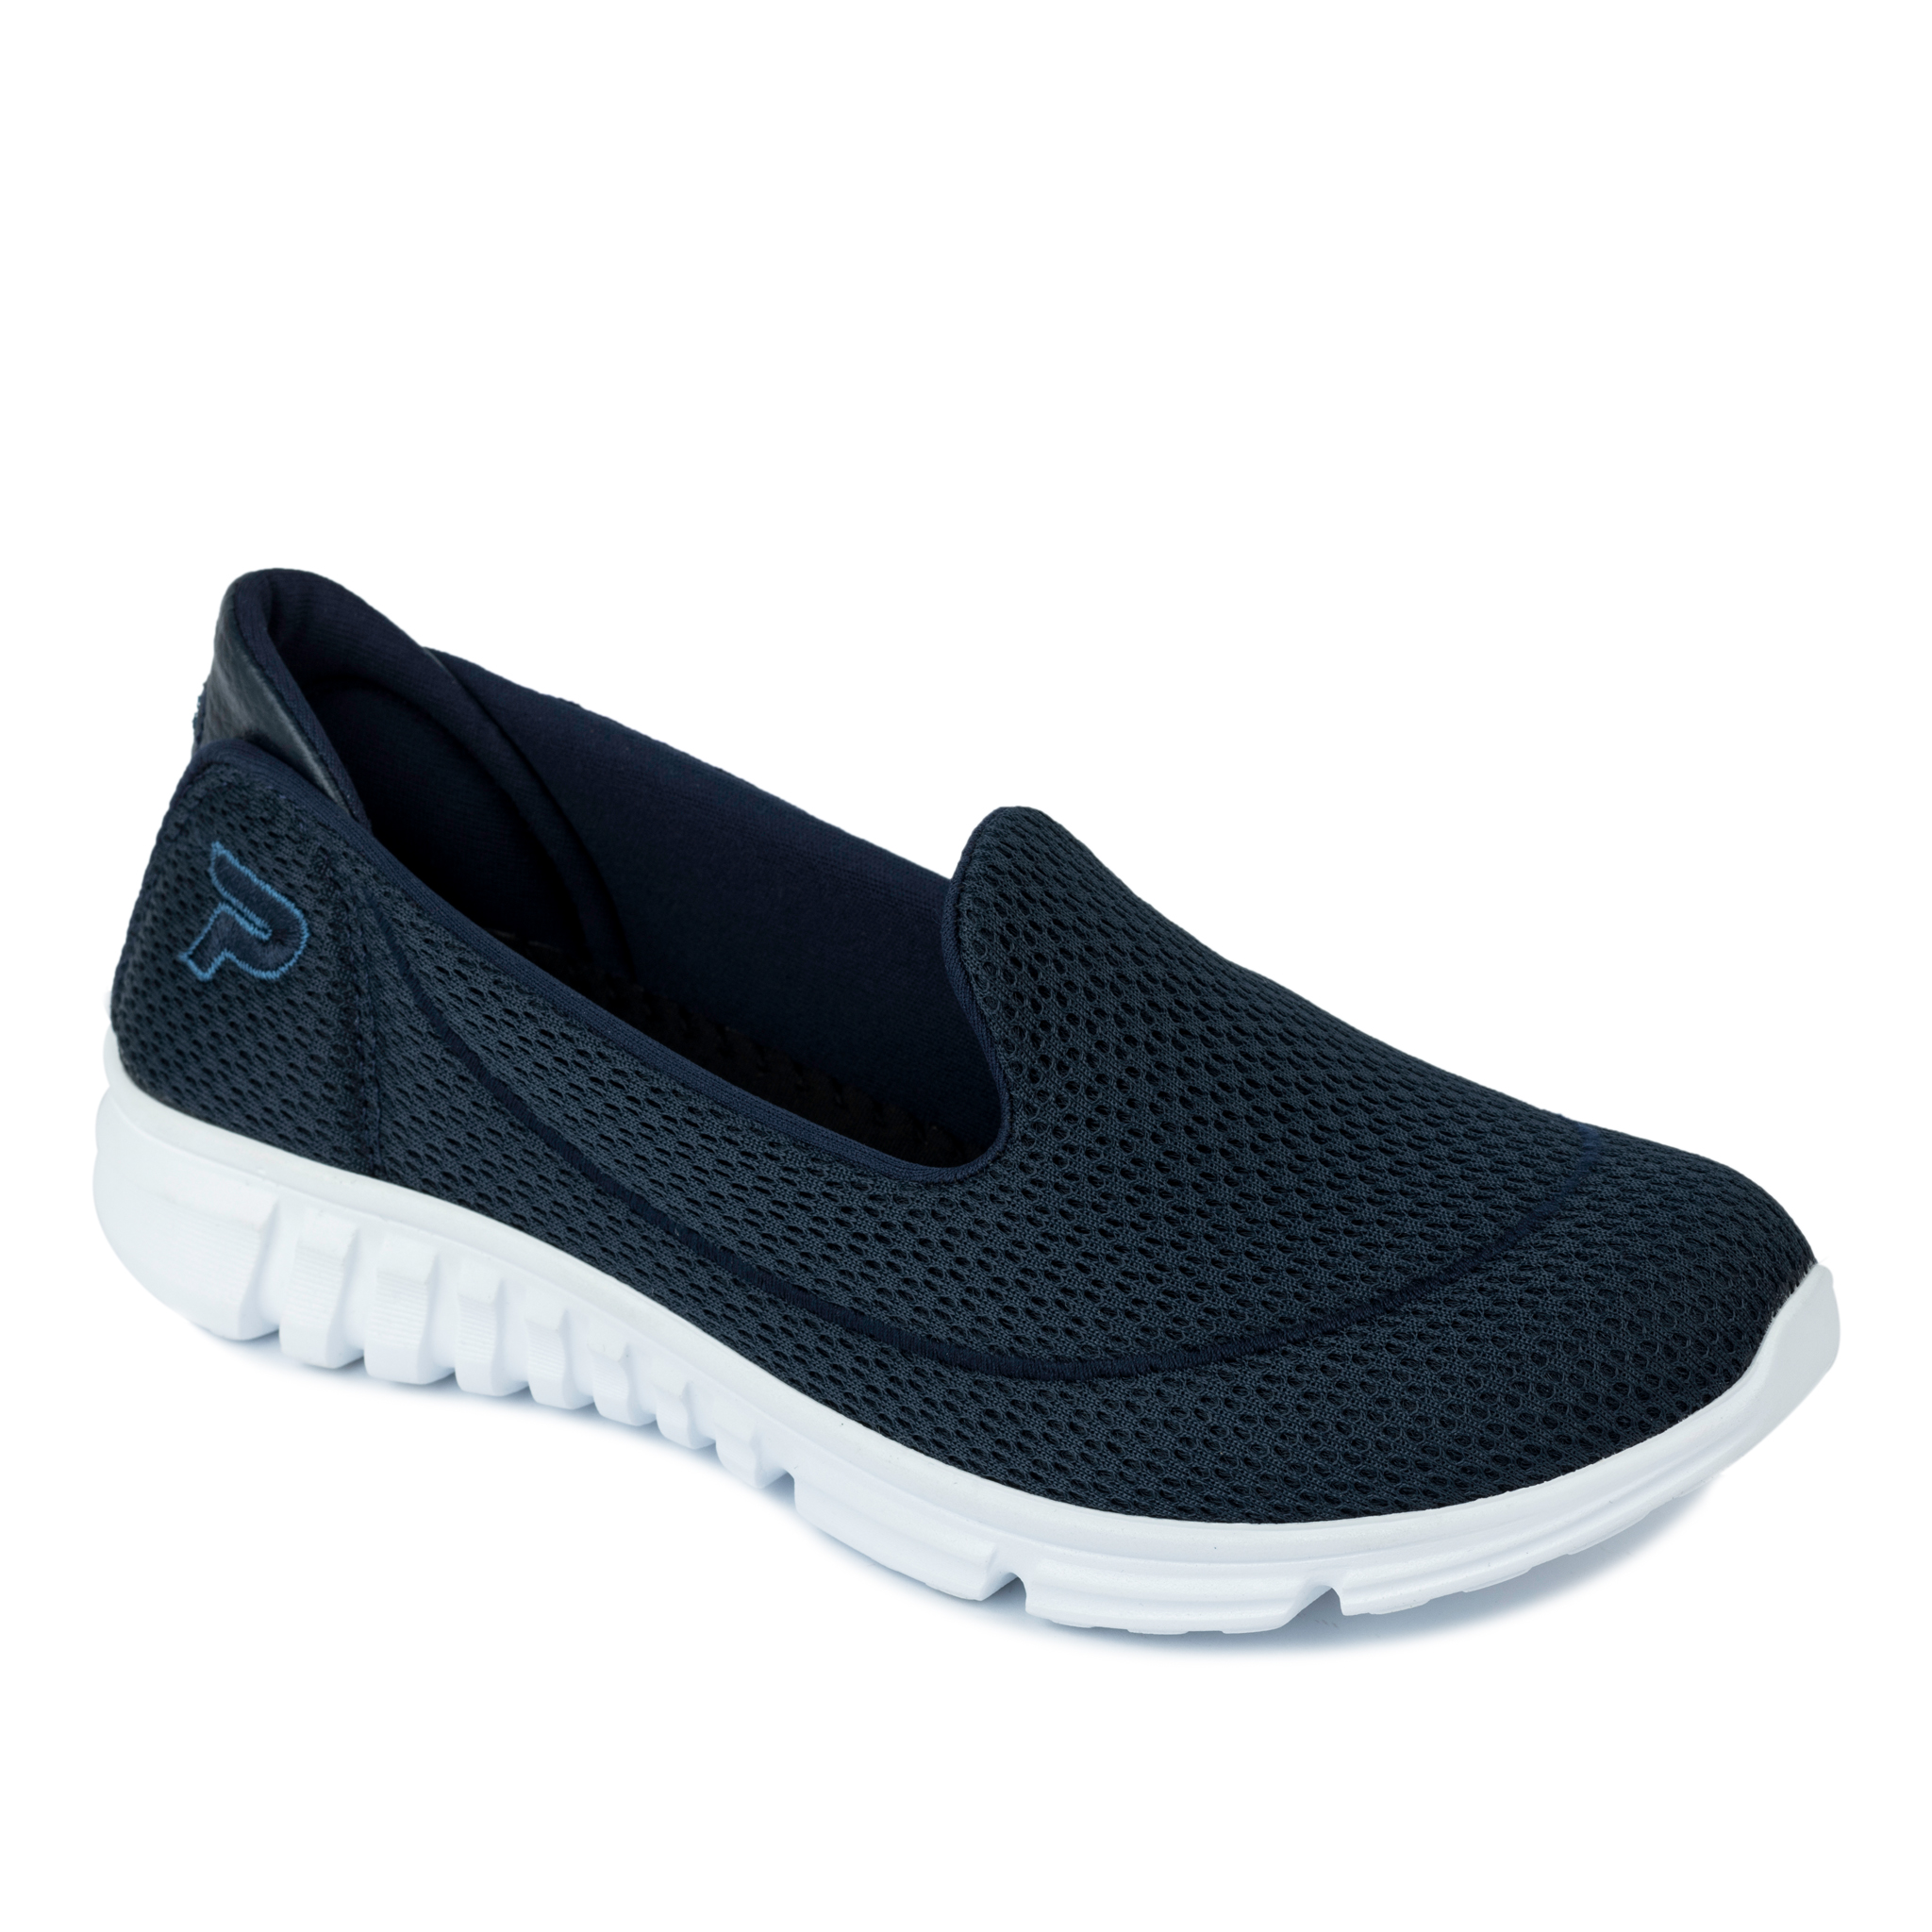 SHALLOW PULL ON SNEAKERS - NAVY BLUE